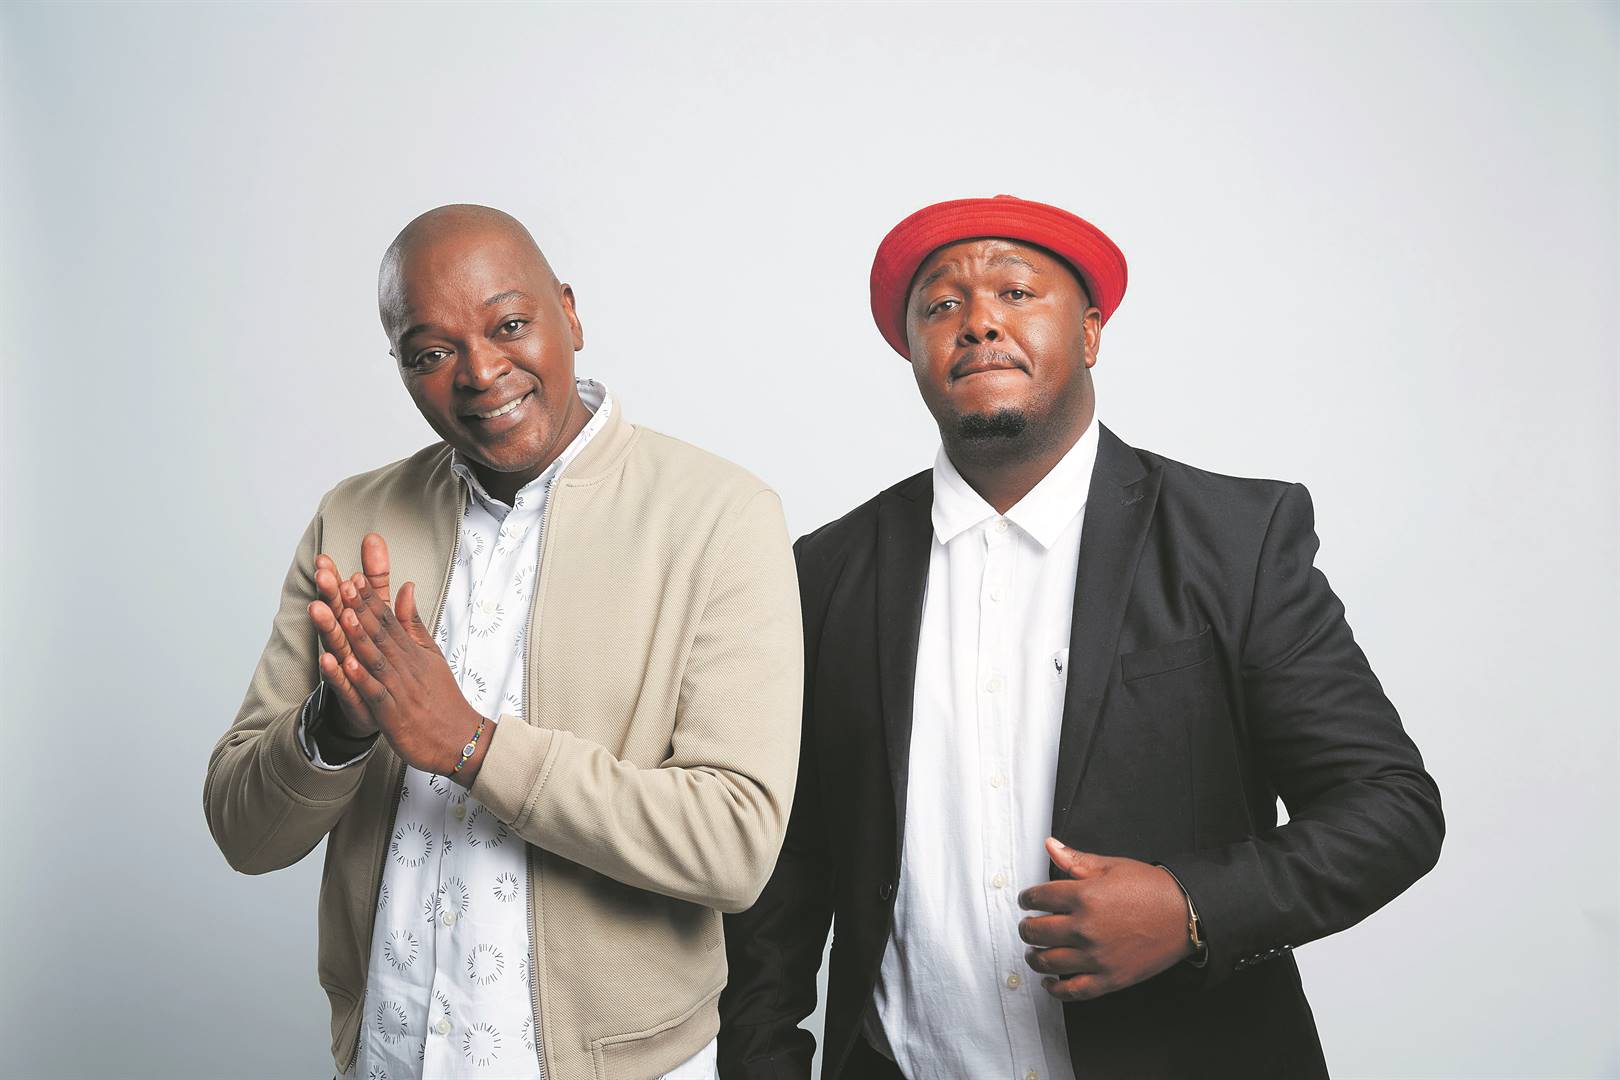 Thomas and Skhumba are going to host separate shows after three years of working together.